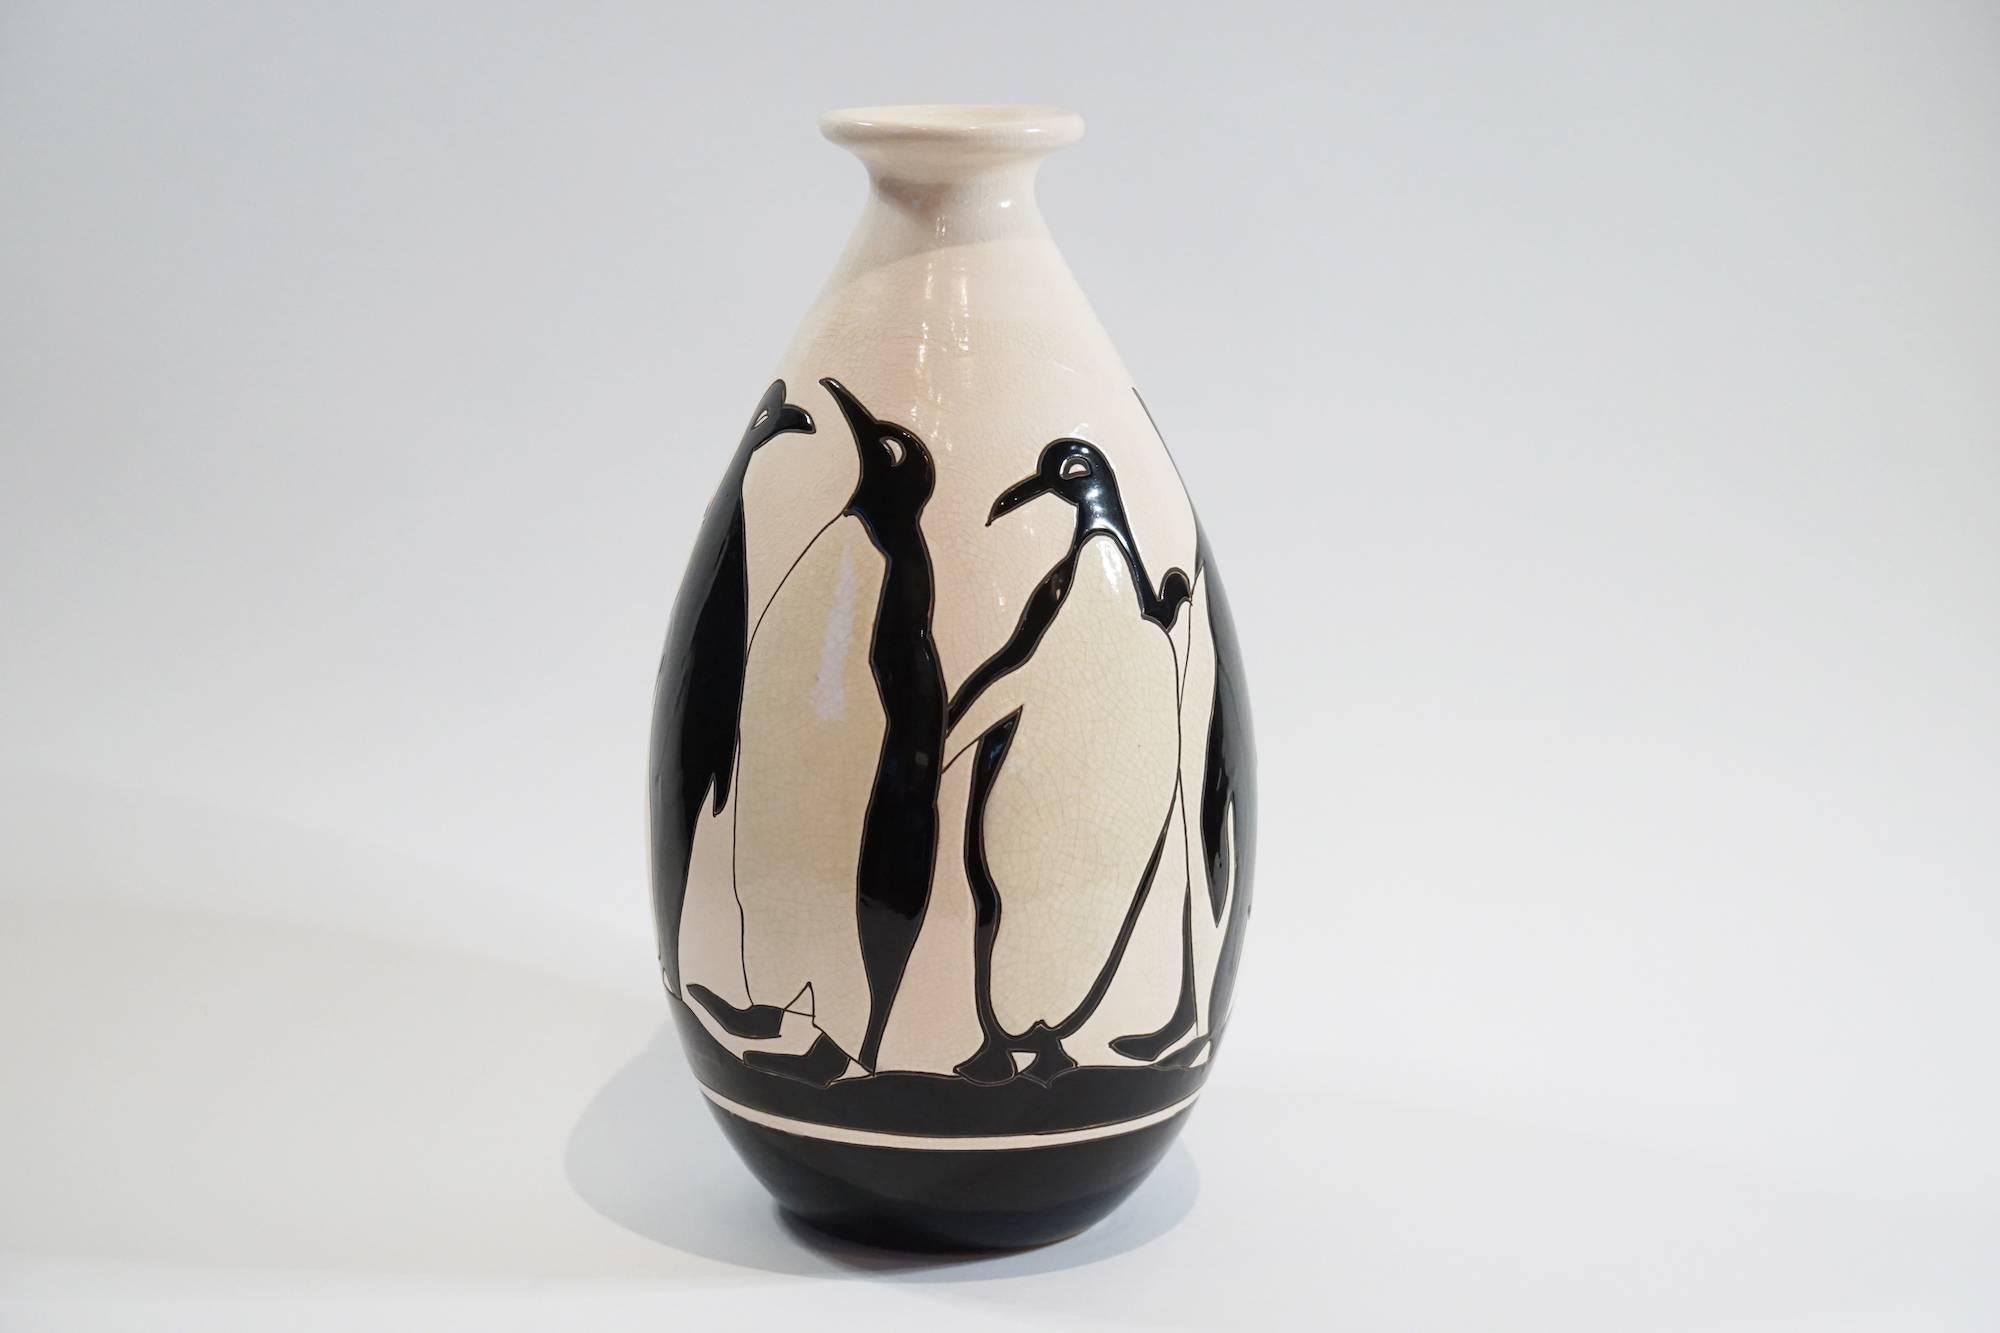 One of the more rare designs by Atelier de Fantaisie.
Polychrome design with penguins in different attitudes. The name Alfred which can be read under some vases might be a funny hint at the penguin drawn by Alain Sait-Ogan, who is considered the